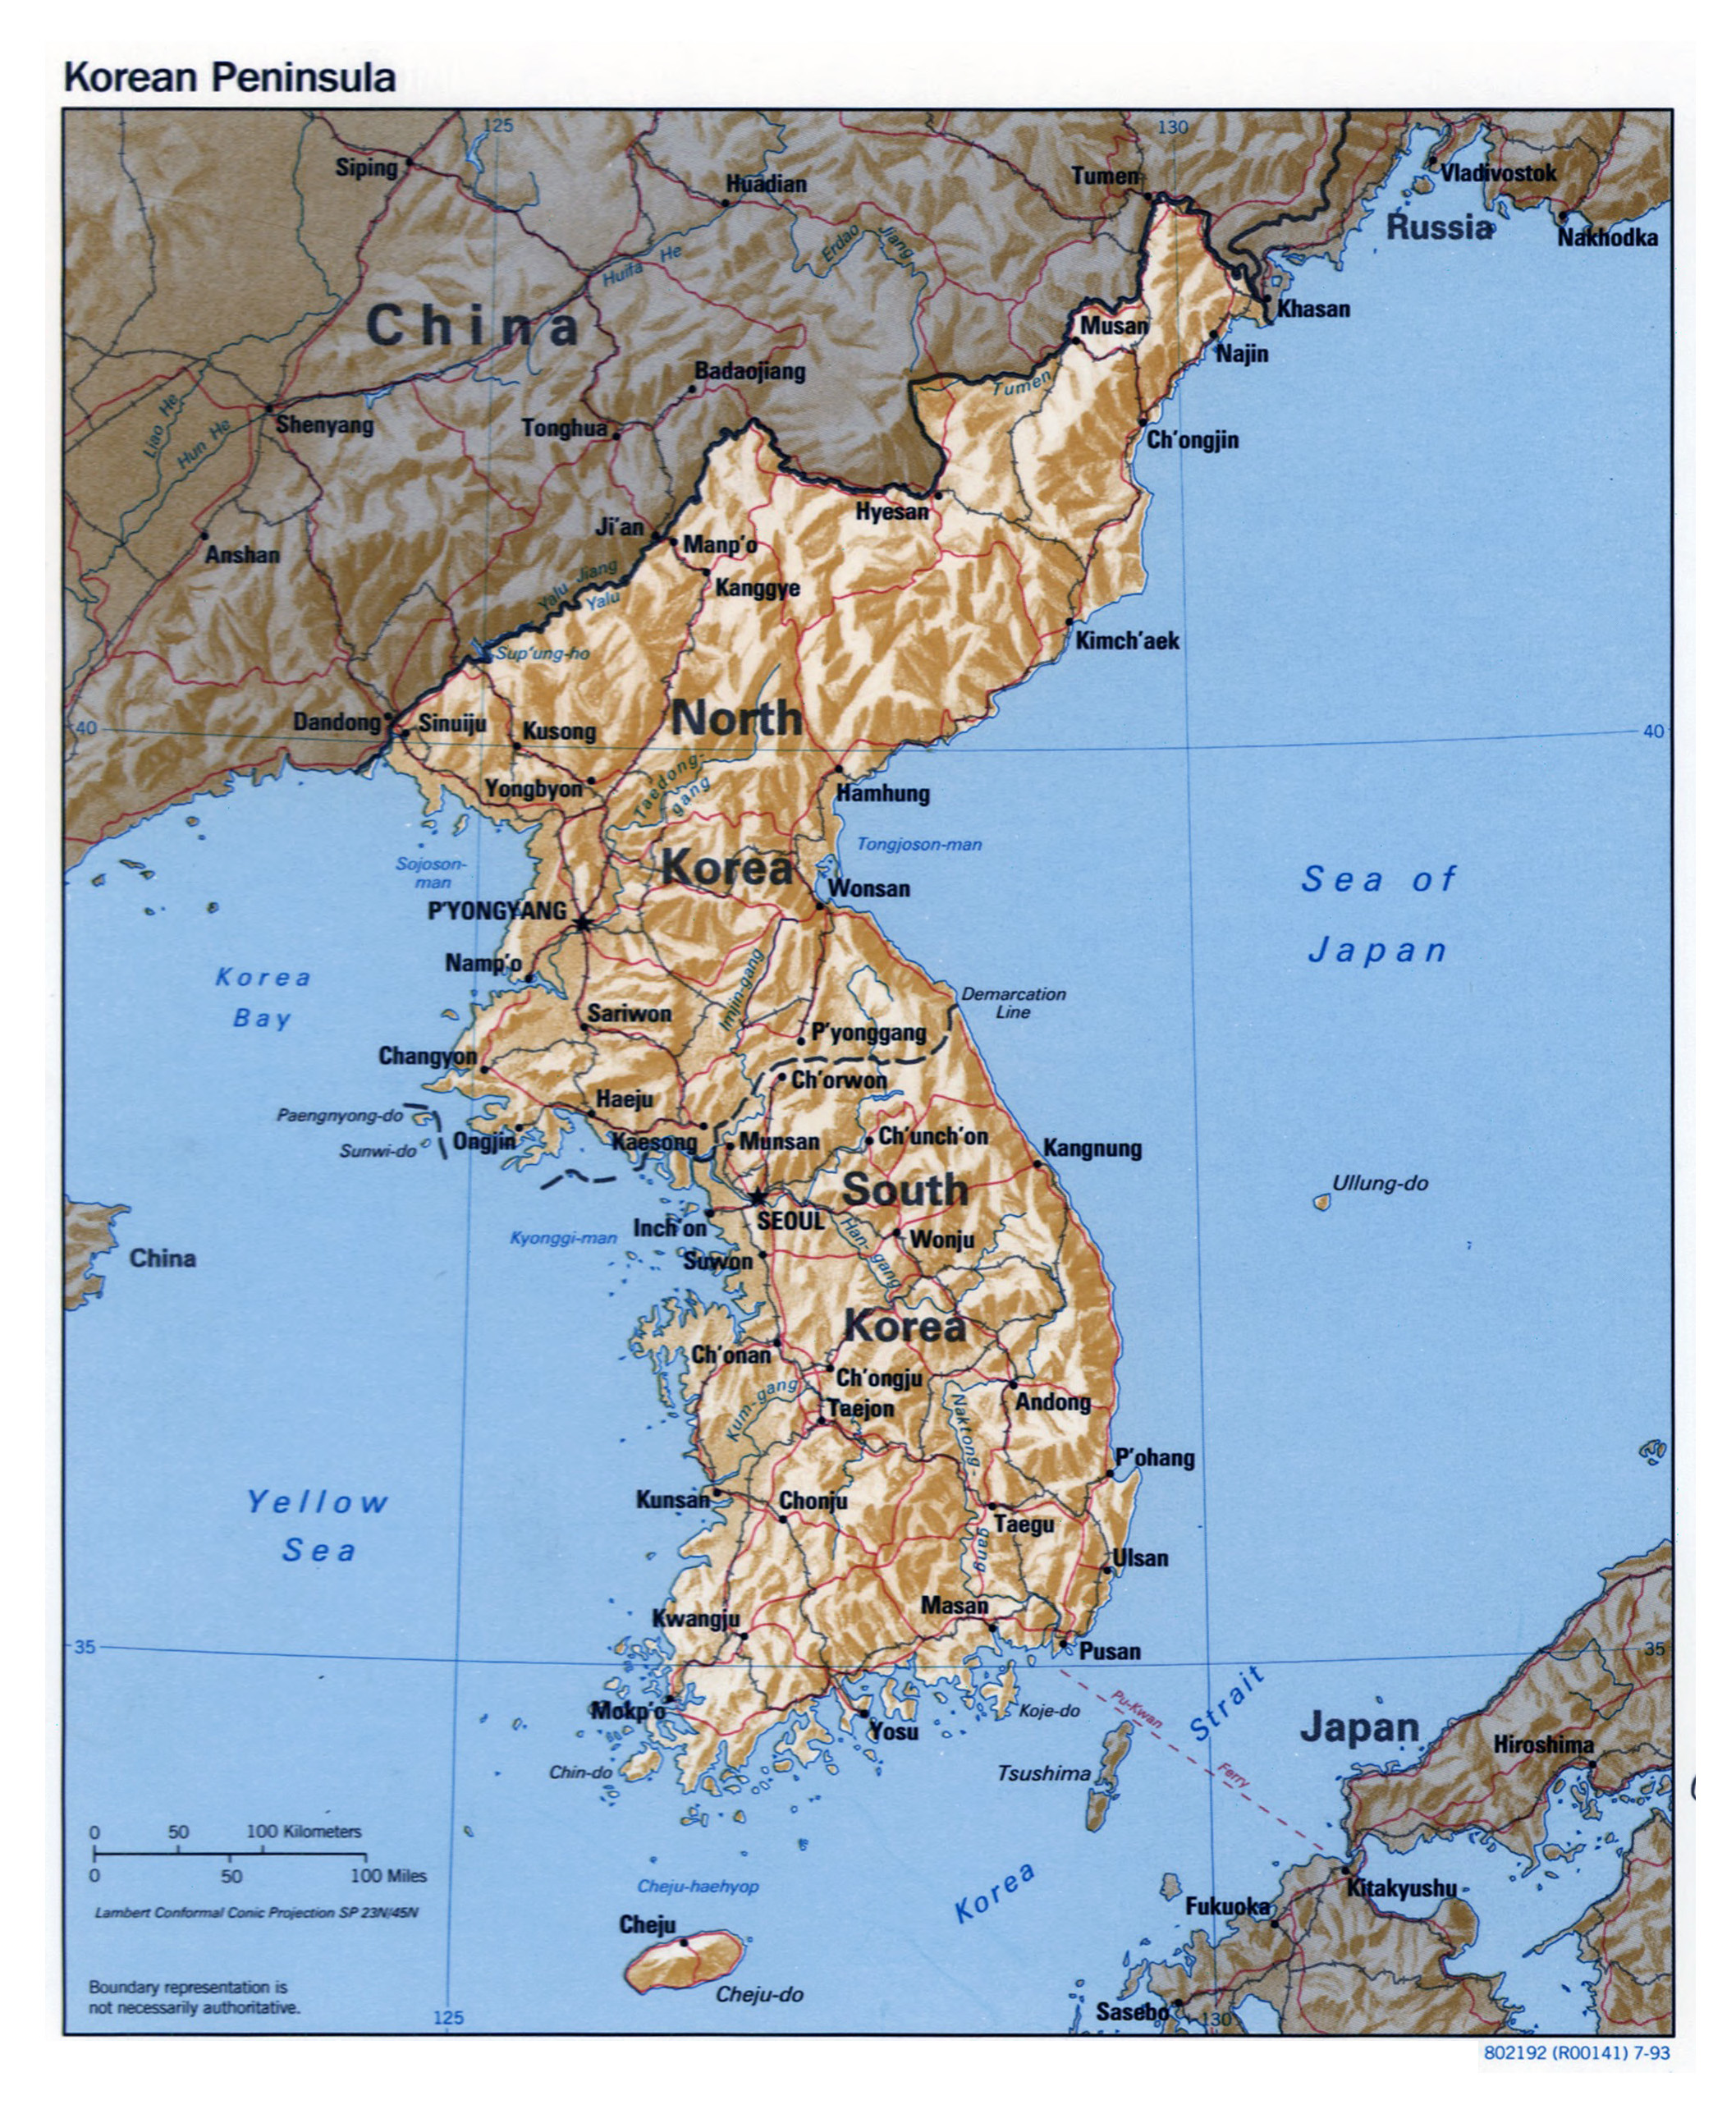 Large Detailed Political Map Of Korean Peninsula With Relief Roads Railroads And Major Cities 1993 